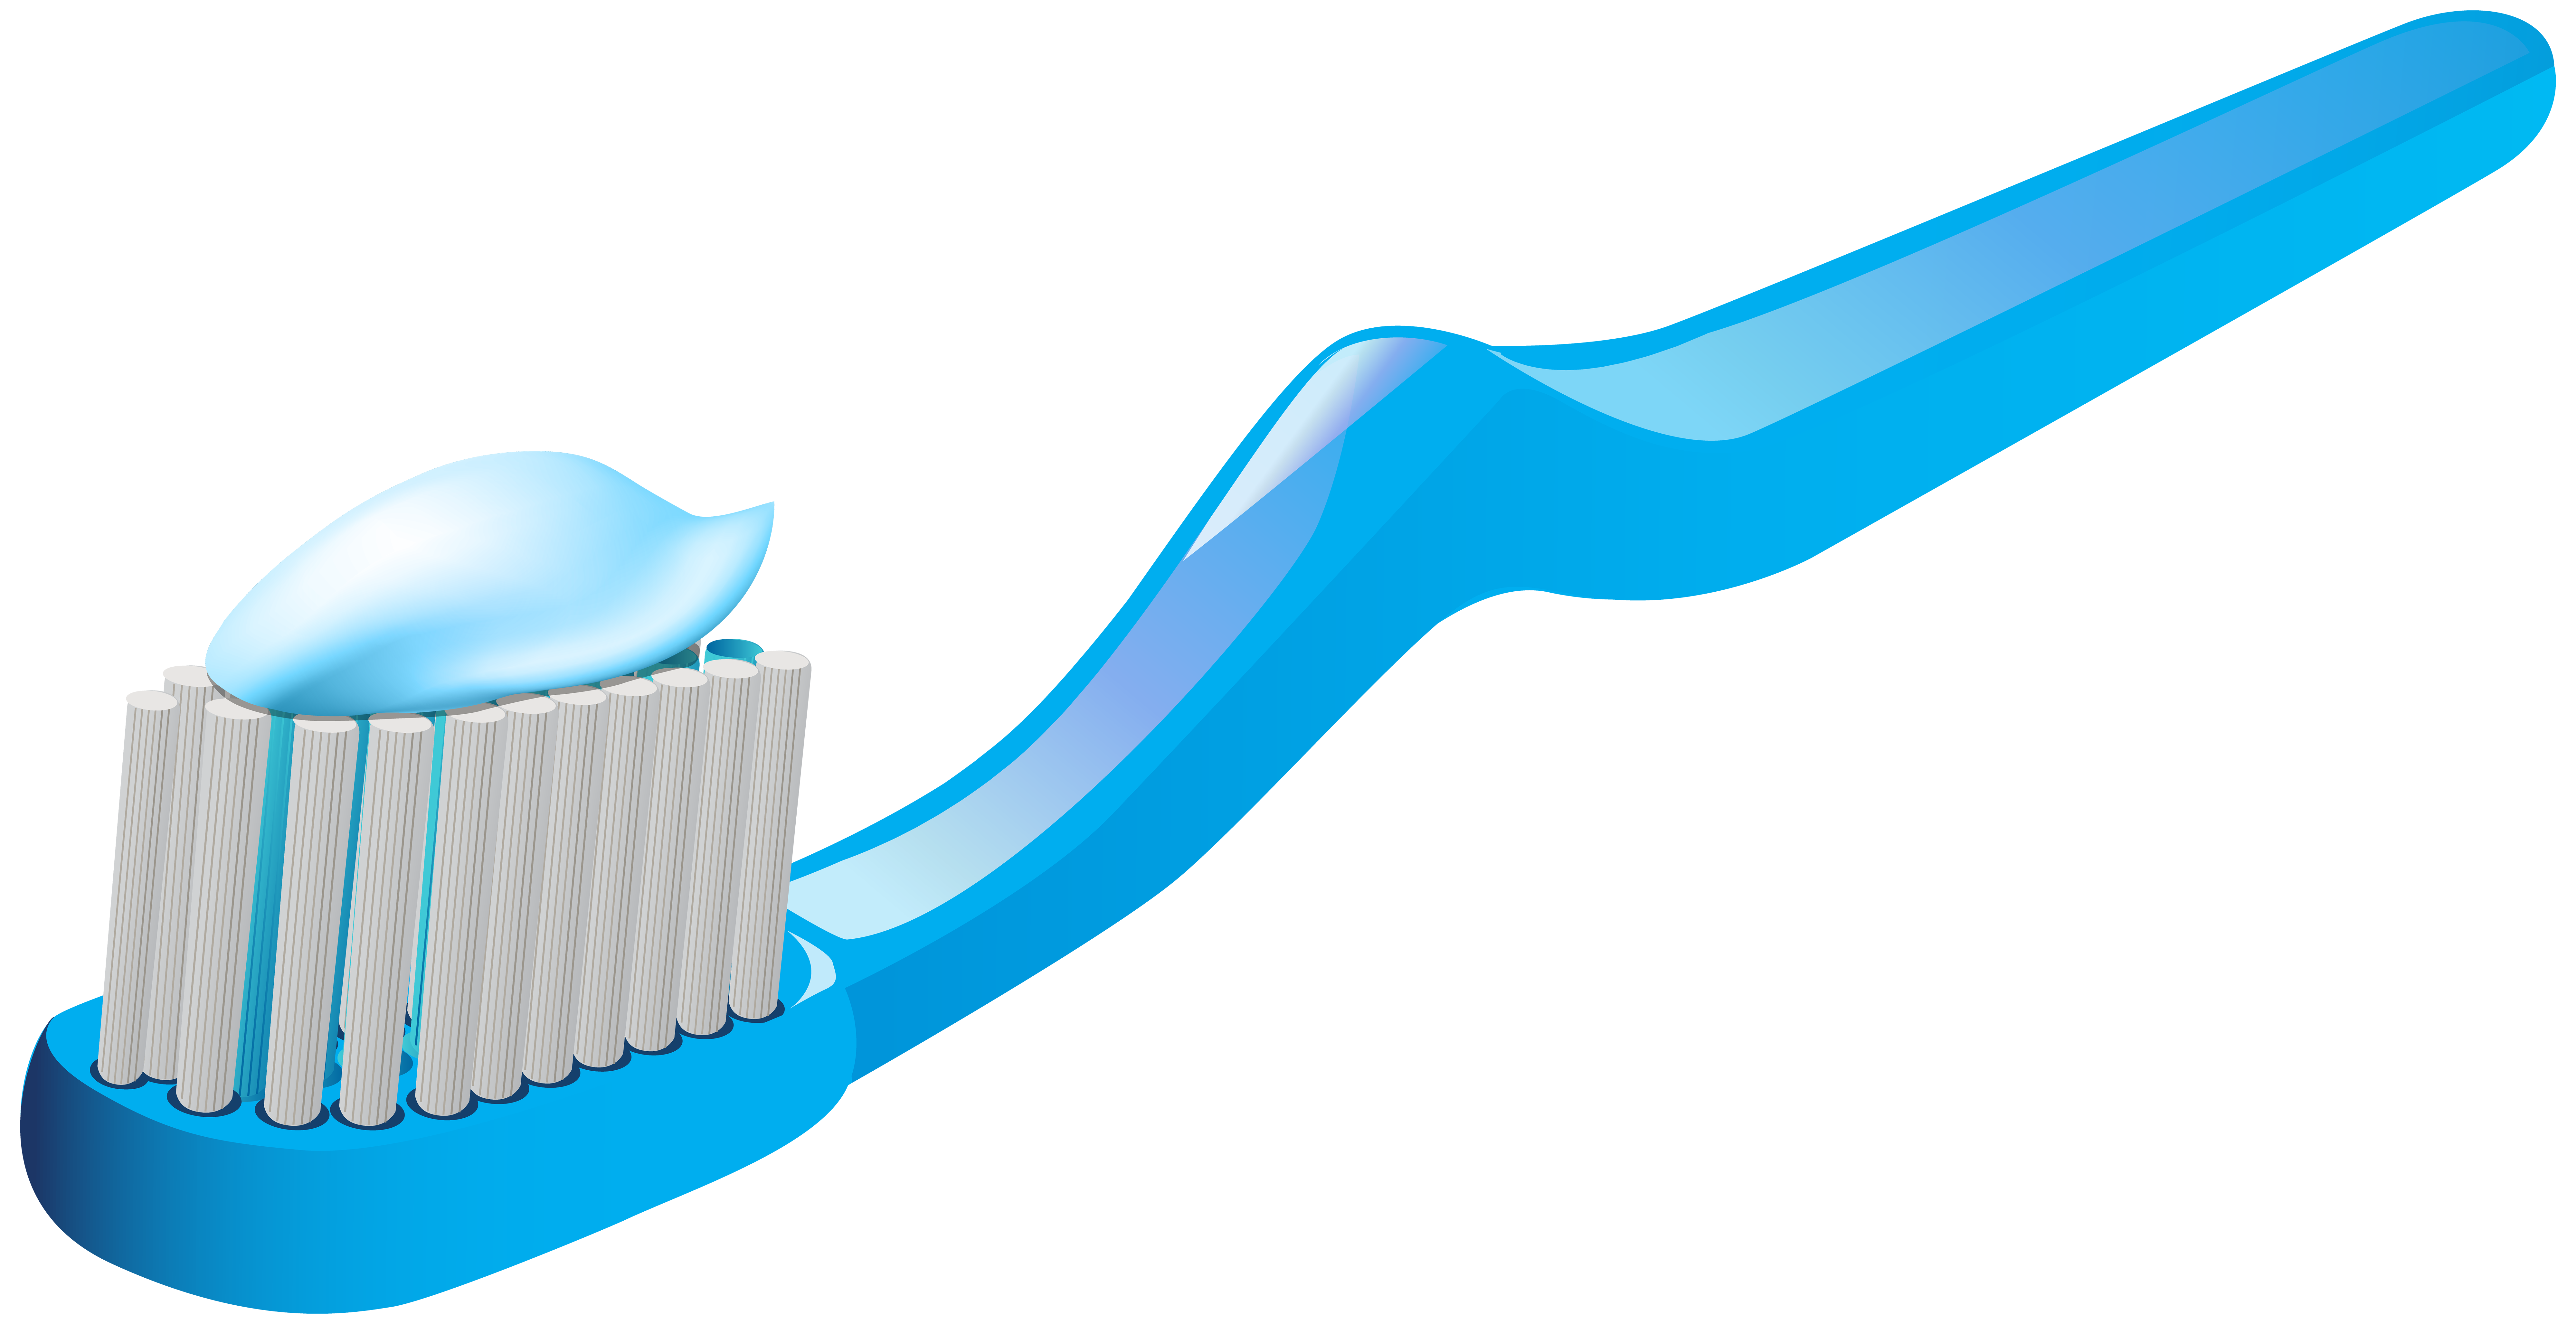 clipart toothbrush and toothpaste